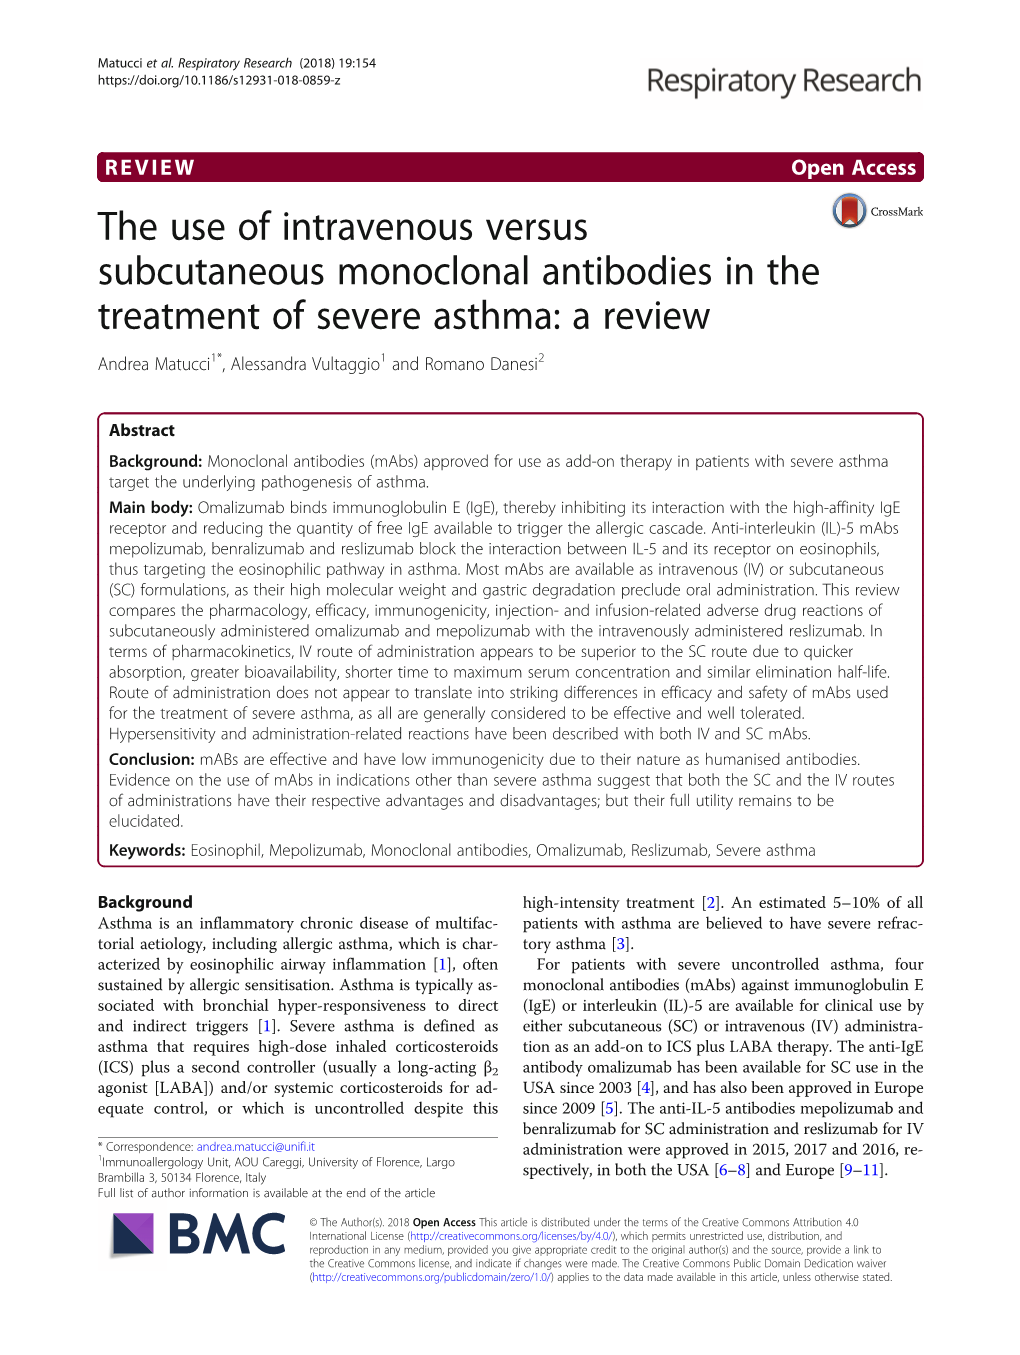 The Use of Intravenous Versus Subcutaneous Monoclonal